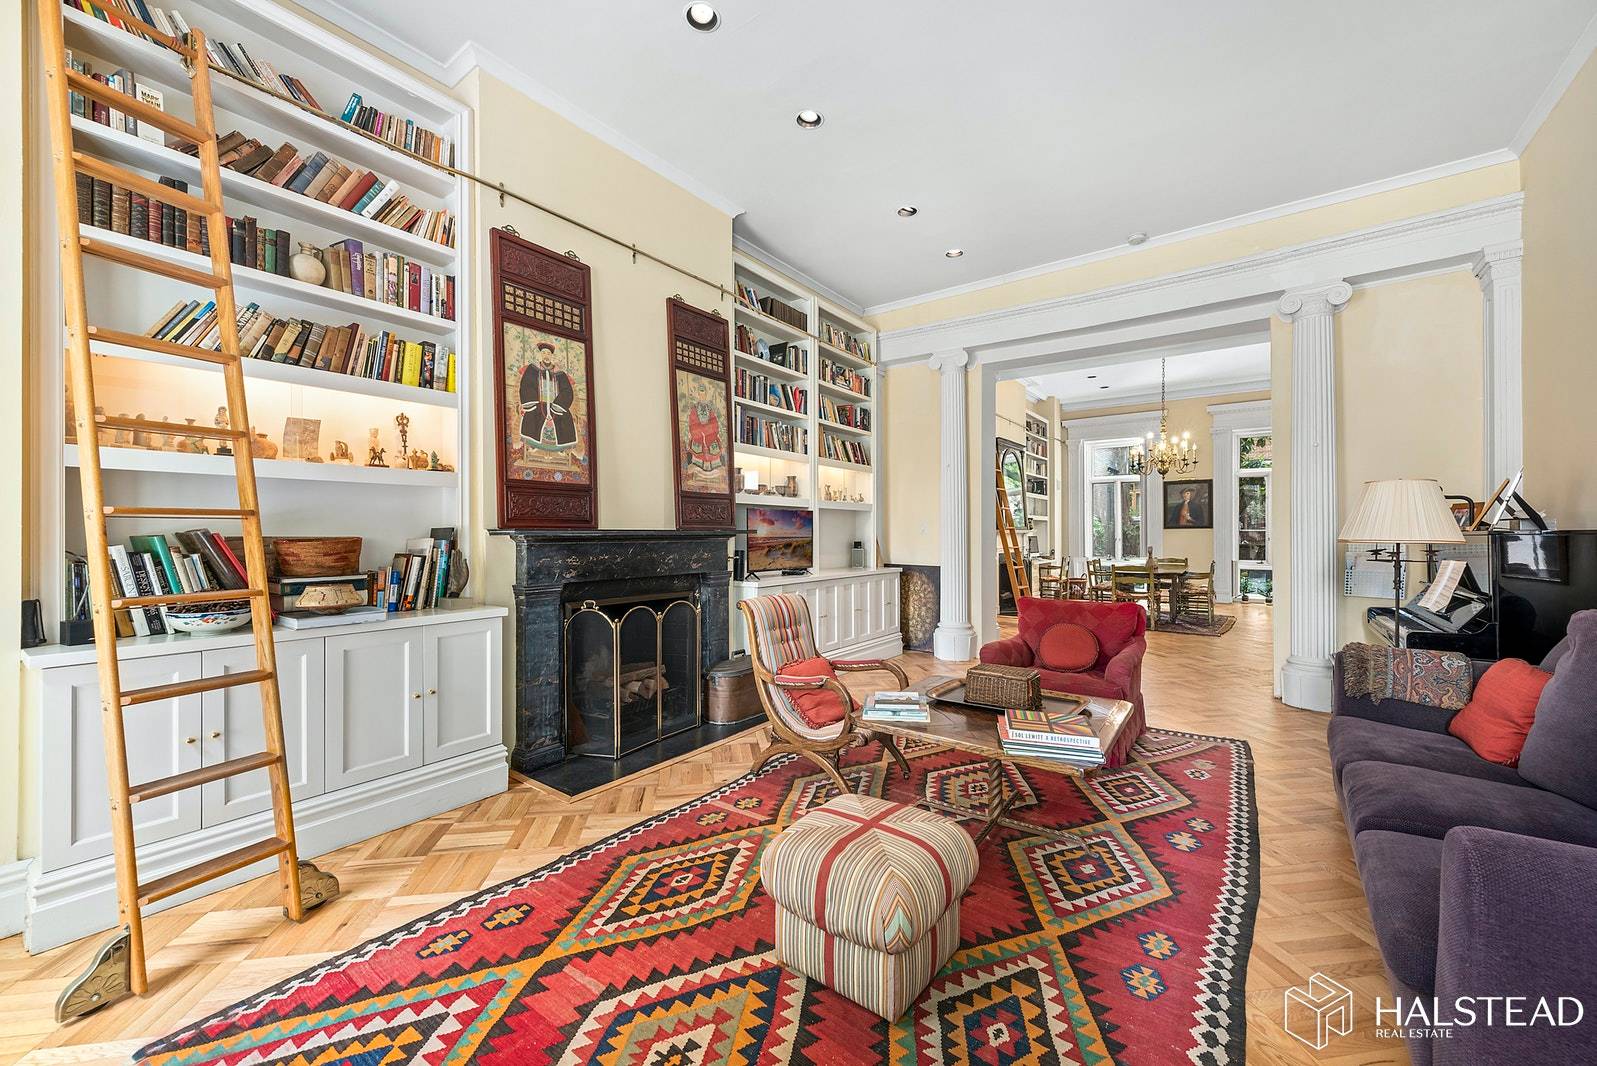 An unrivaled Gold Coast 25 foot wide Greek Revival Townhouse built circa 1838 sits just off lower Fifth Avenue and north of the Arch at Washington Square.